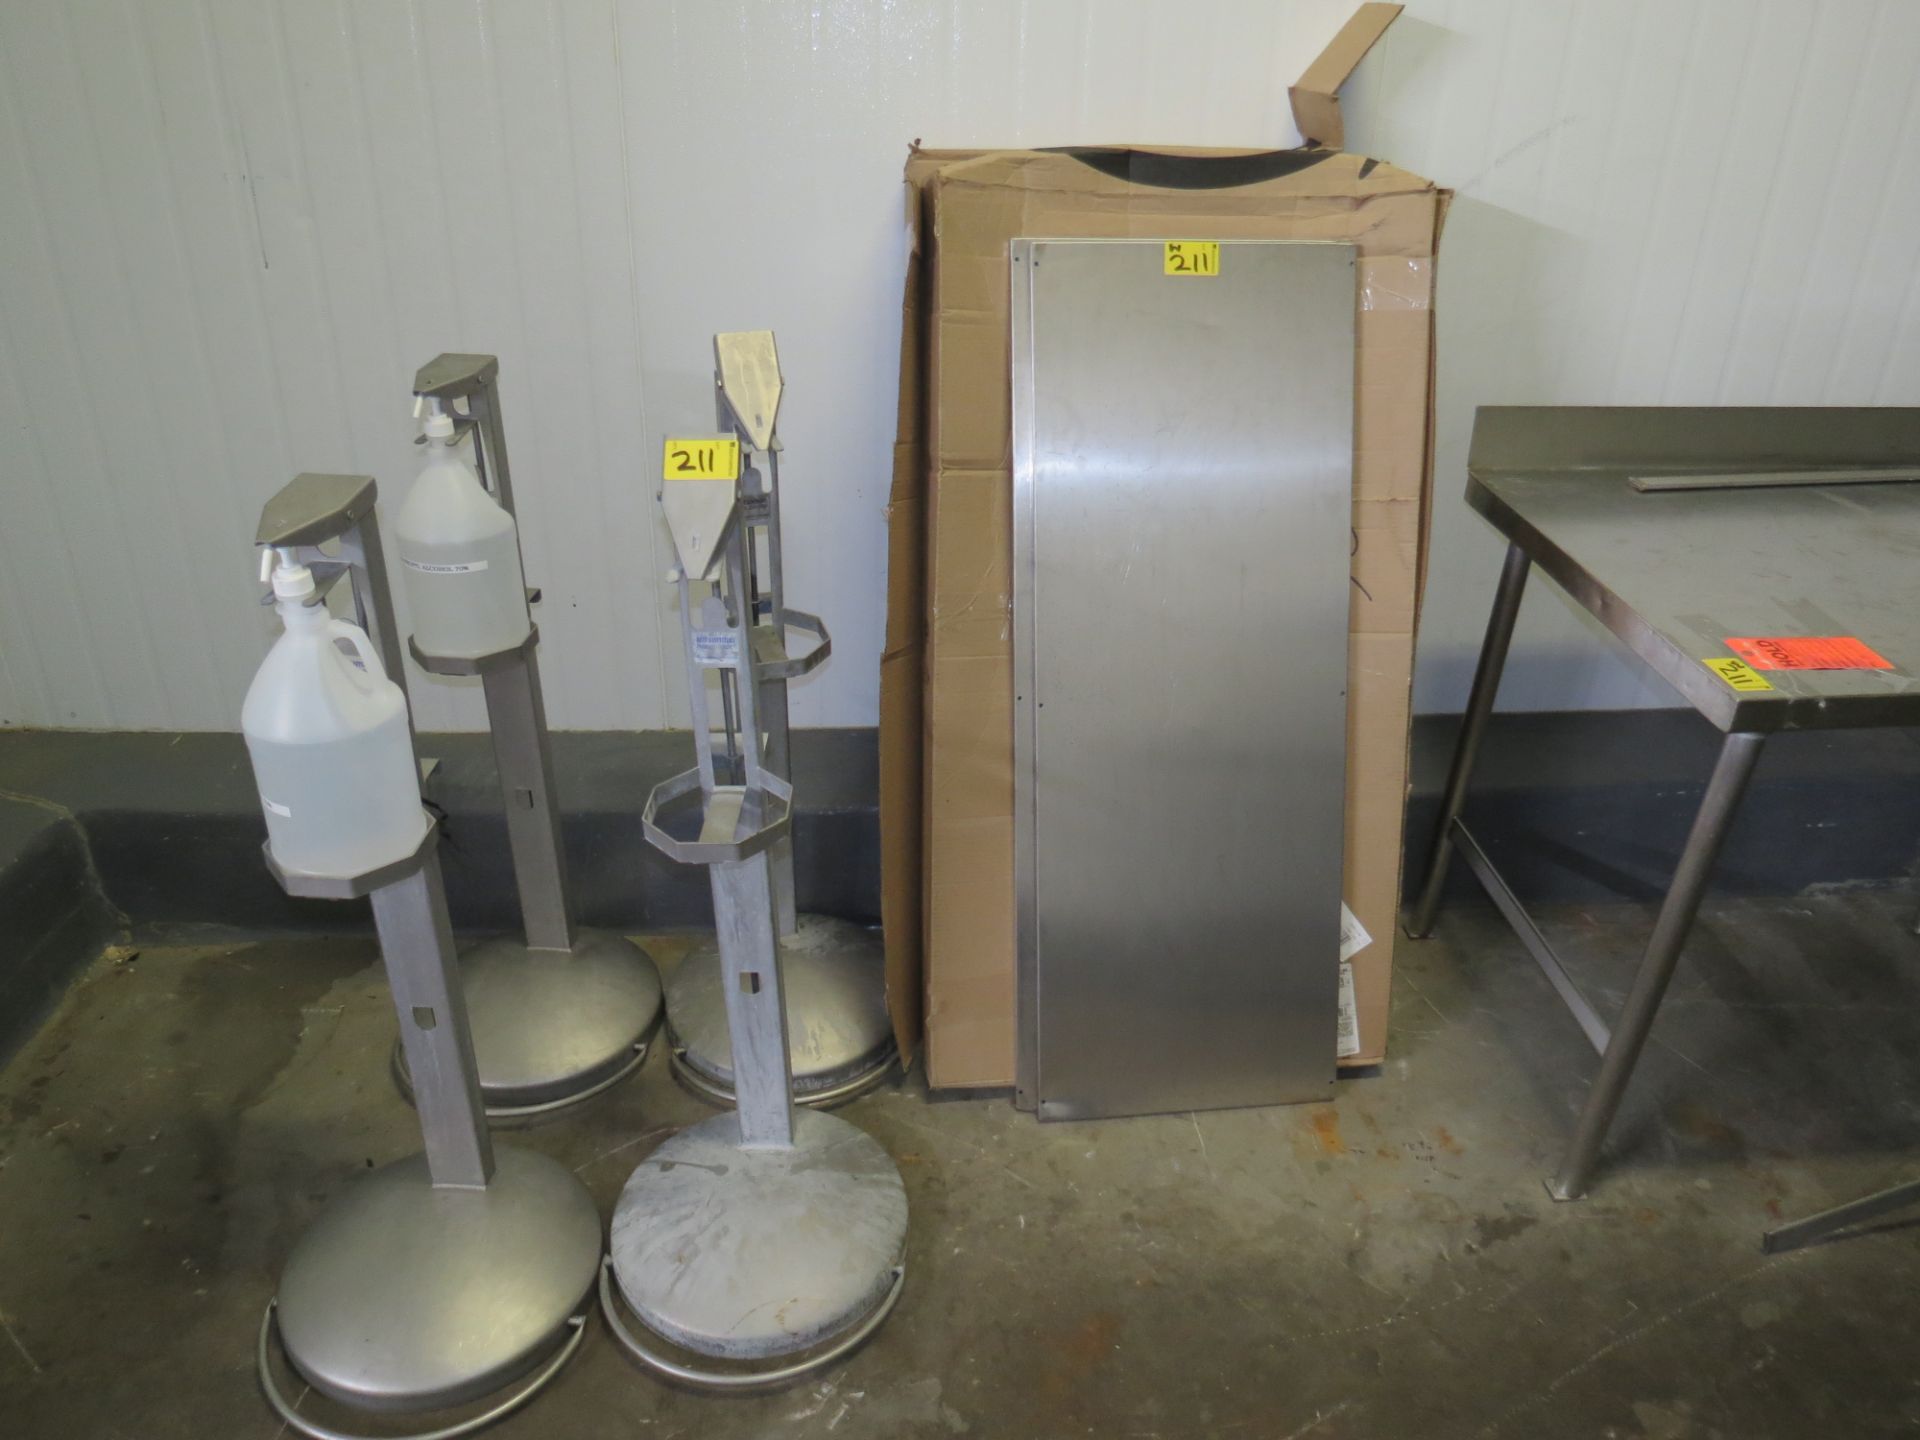 Lot of Damaged Stainless Steel Tables, Trays & Sanitizer Dispensers - Image 4 of 4